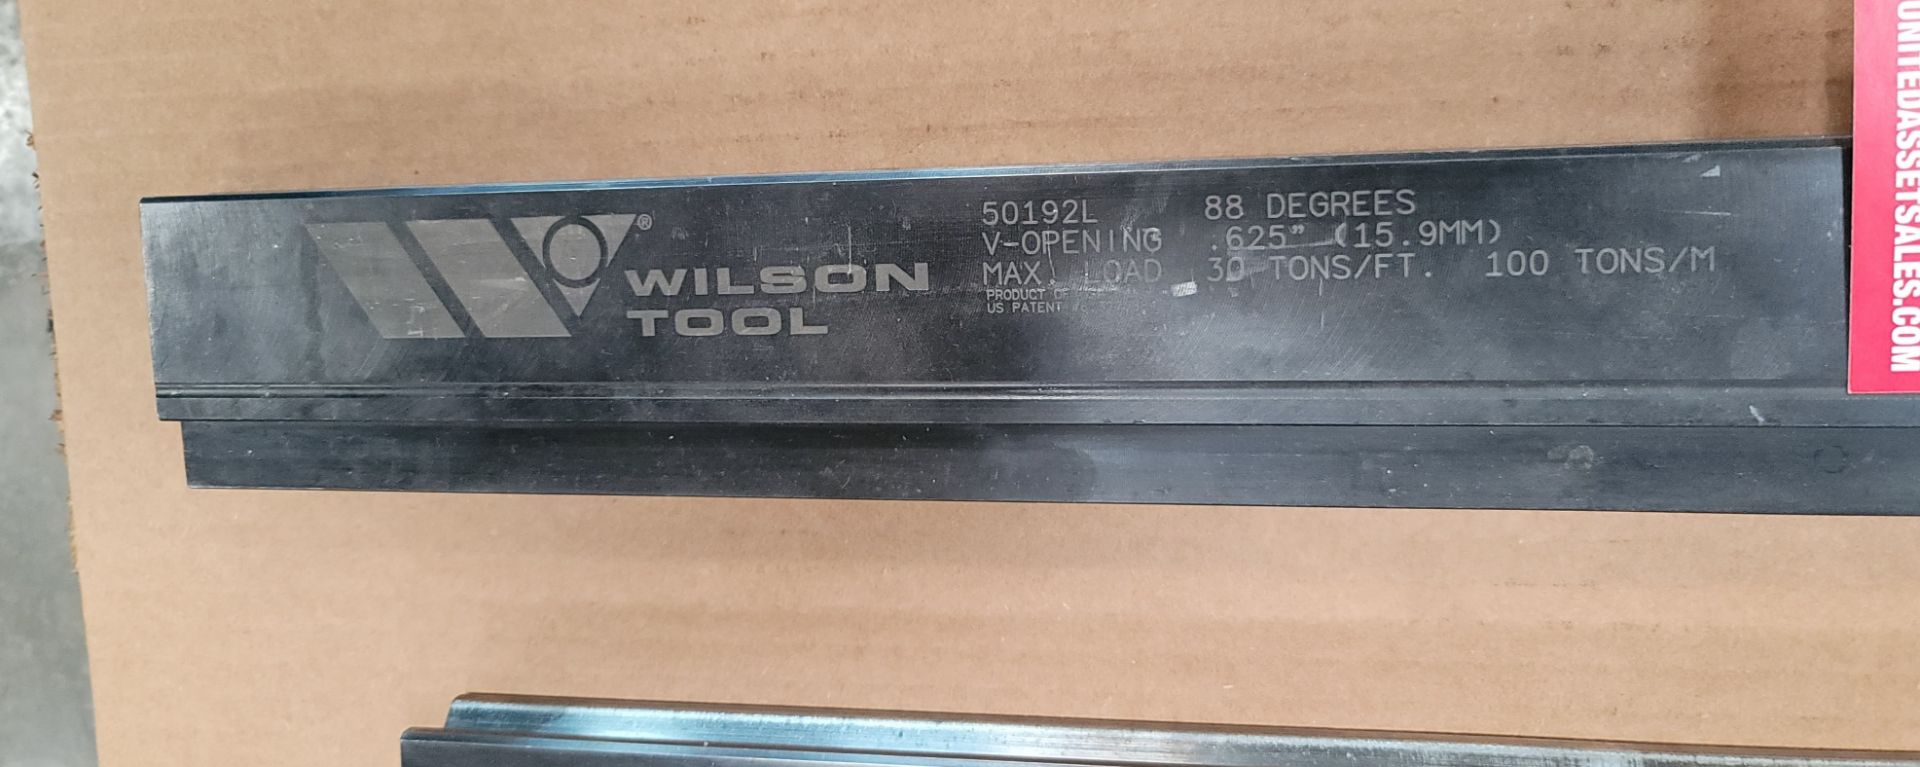 LOT - WILSON TOOL BRAKE DIES (SEE PHOTOS FOR SPECS) - Image 2 of 2